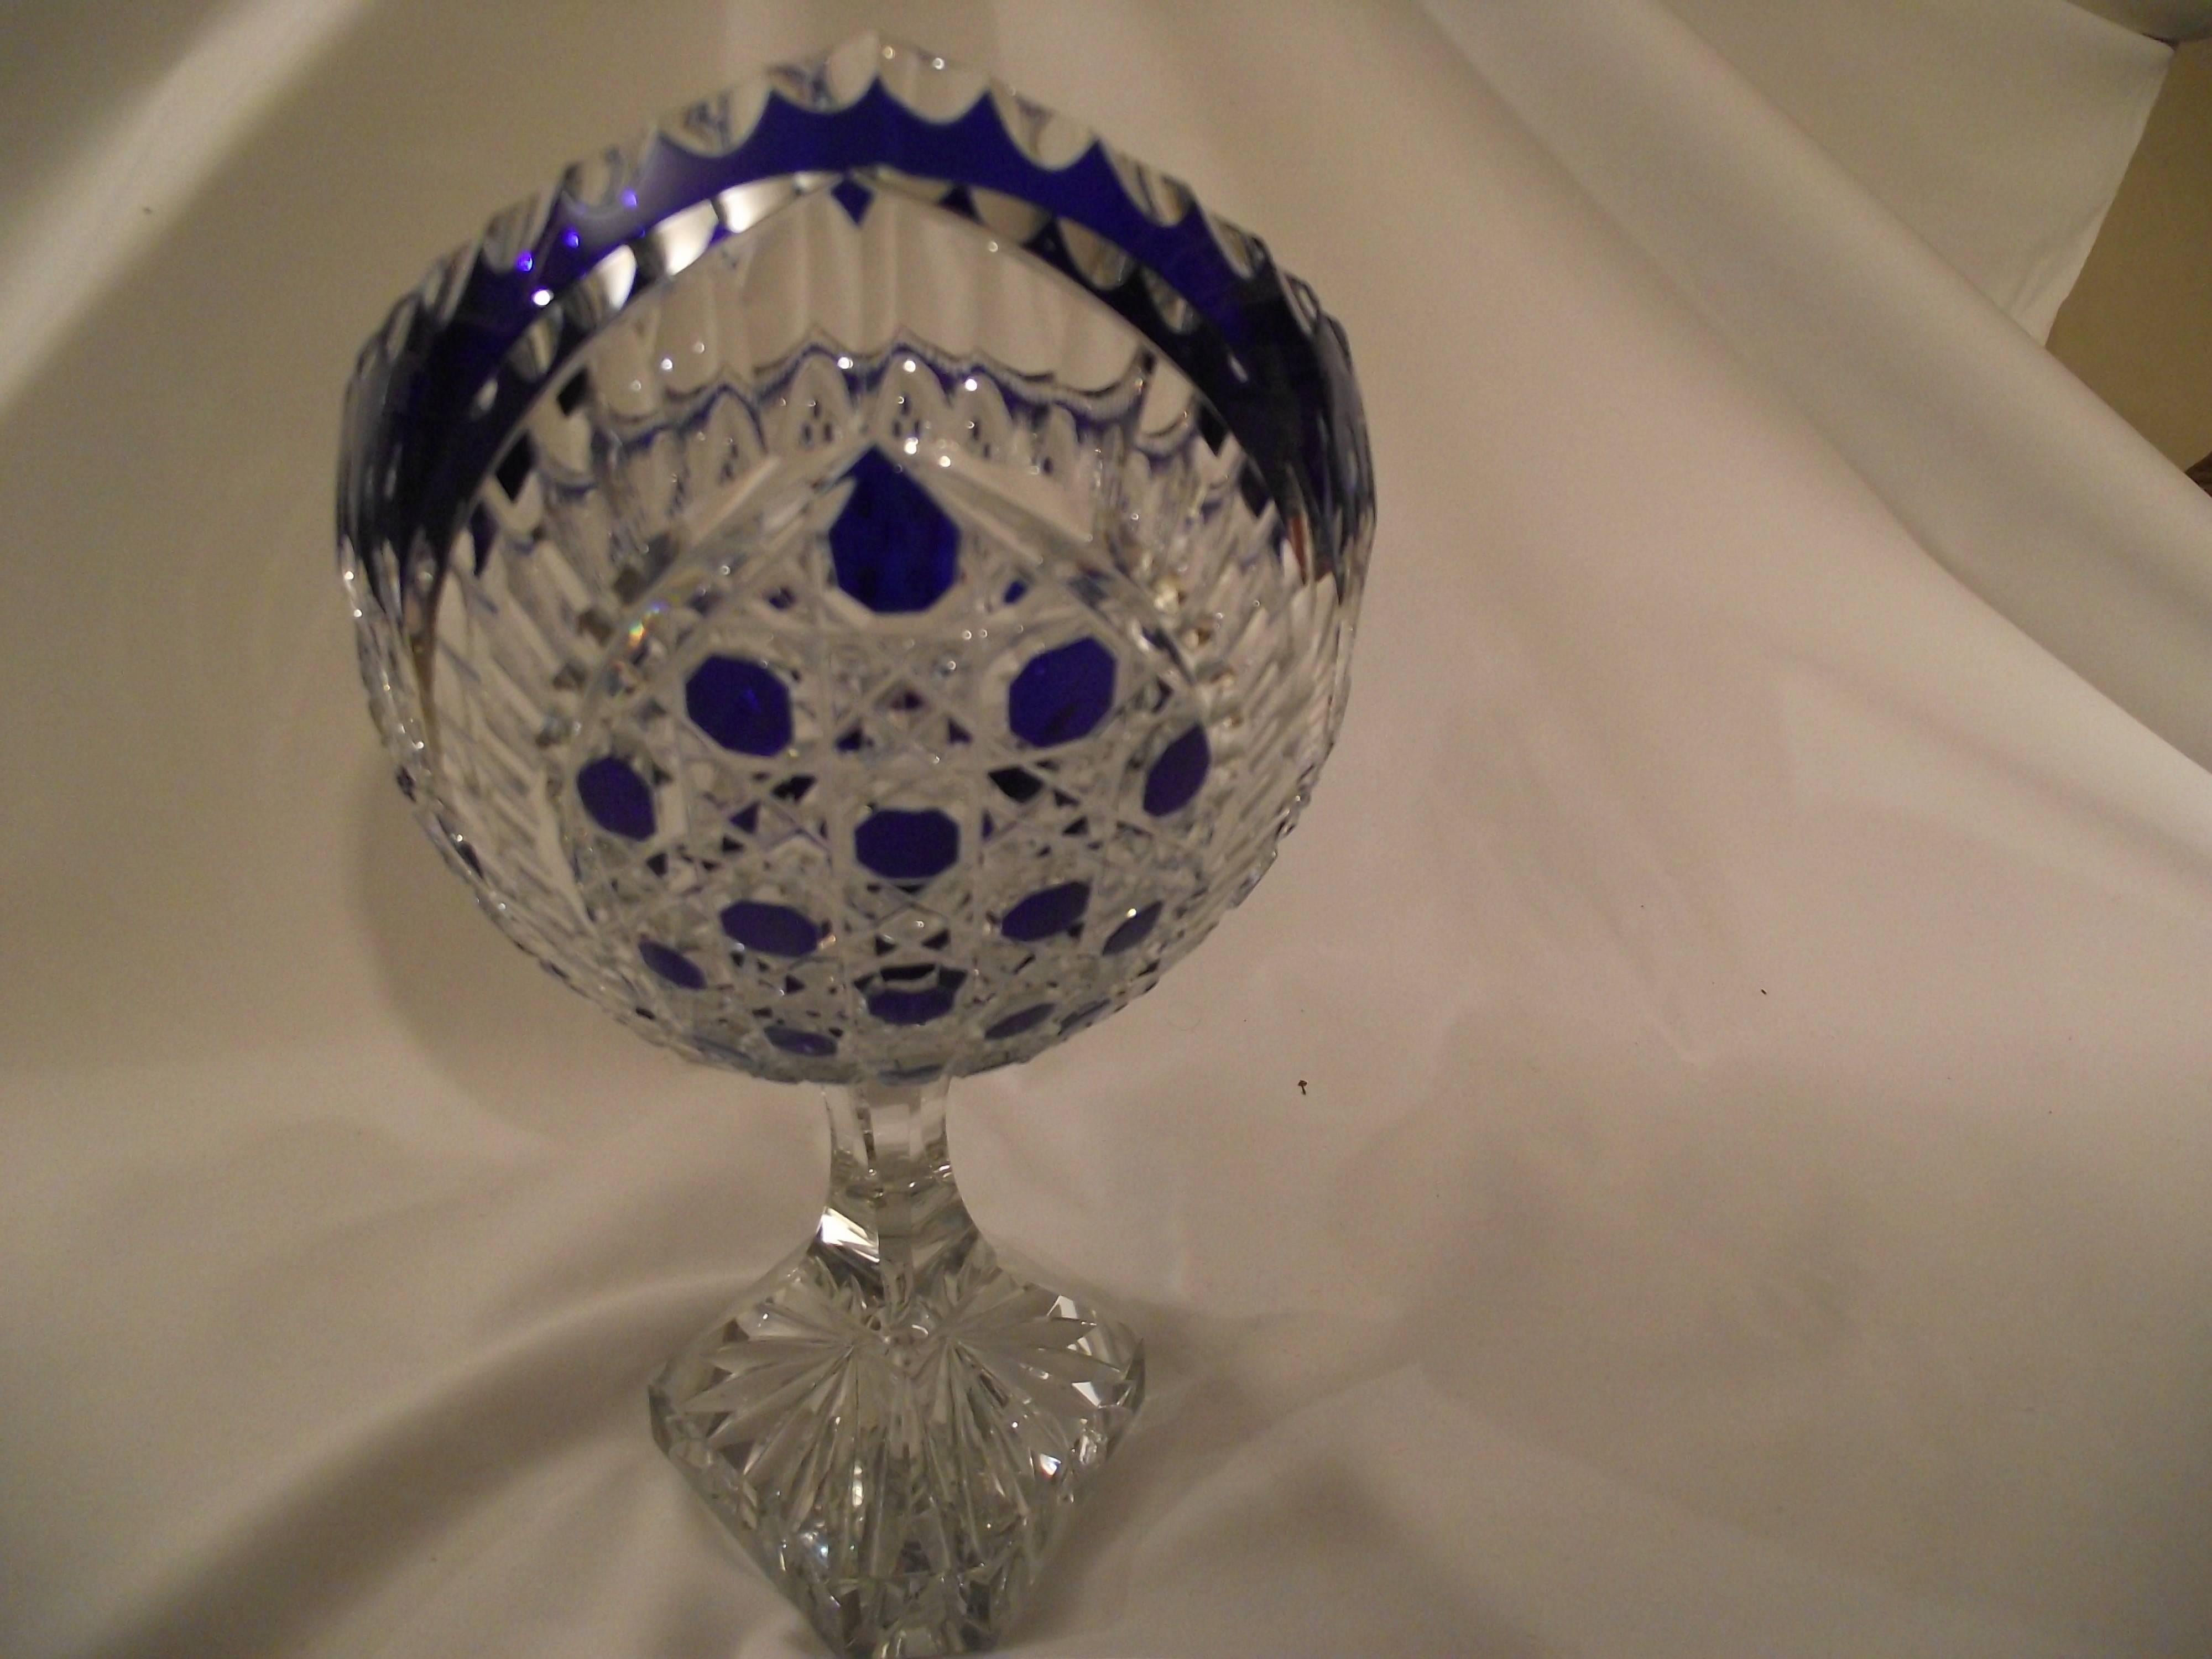 Remarkable cobalt blue to clear cut crystal centrepiece. Absolutely beautiful. Unusual shape.